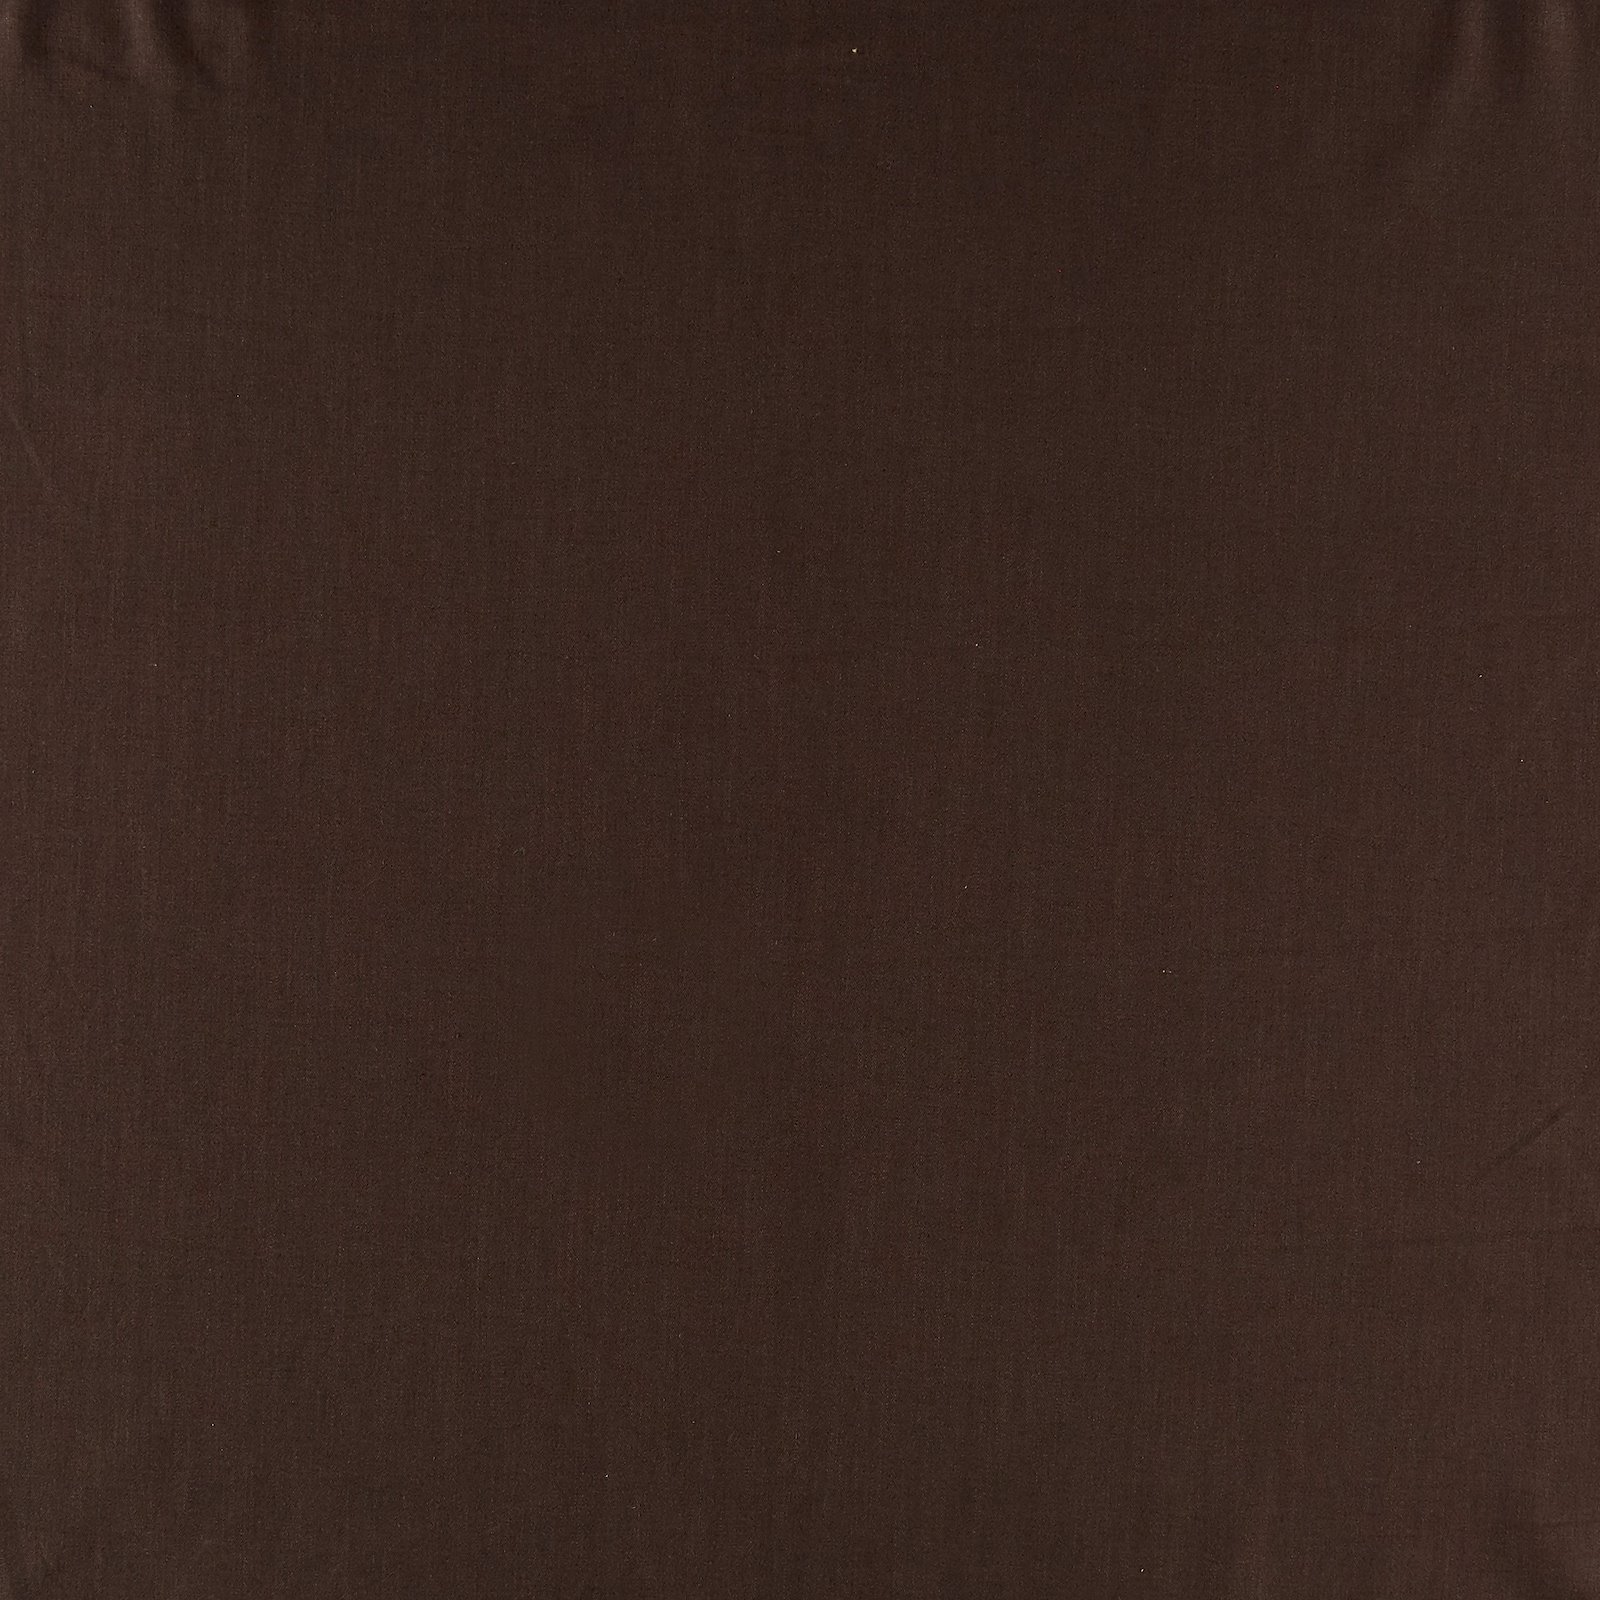 Cotton/linen w stretch brown 410163_pack_solid